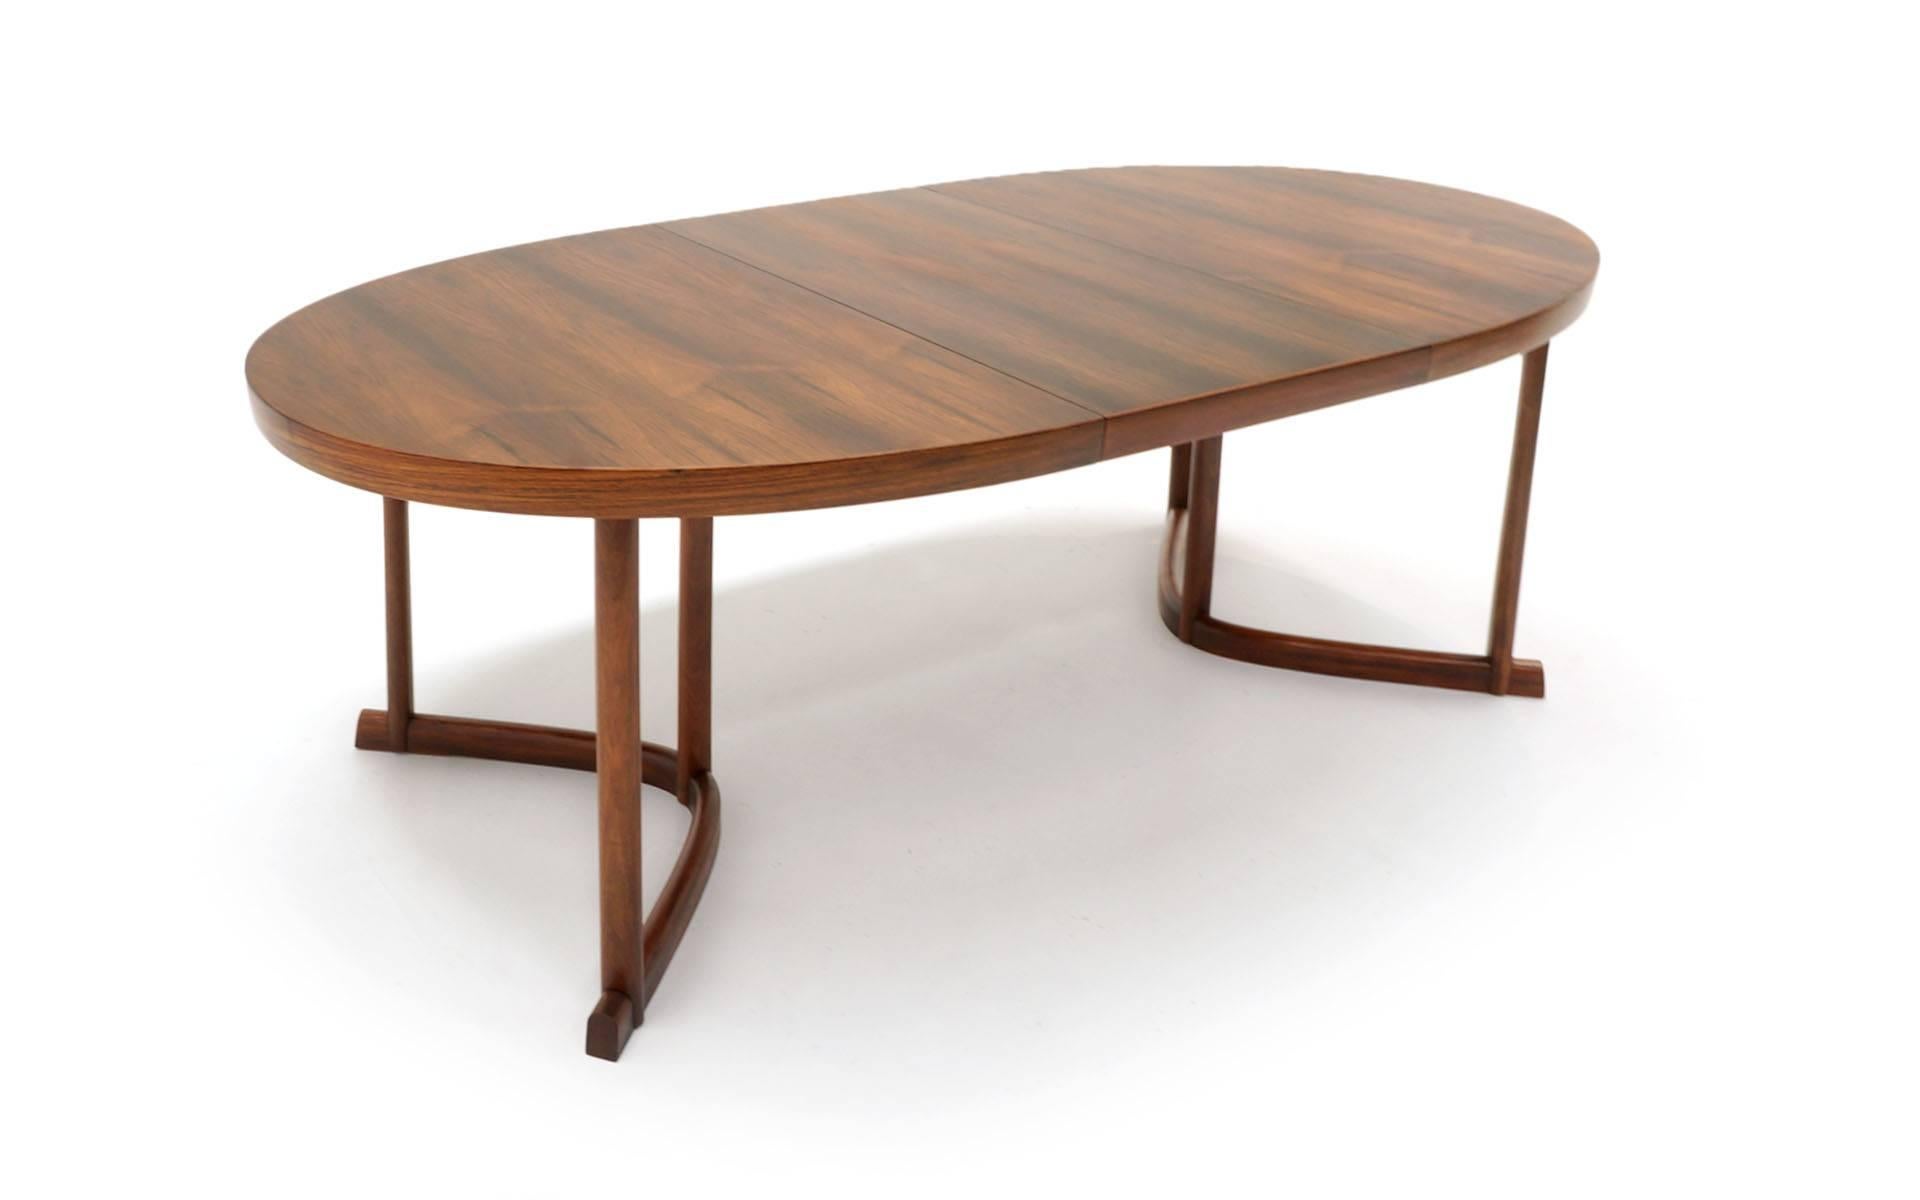 Beautiful Brazilian rosewood dining table made in Denmark, 1960s. 5 feet 4 inches long and expands to 7 (seven) feet with the 20